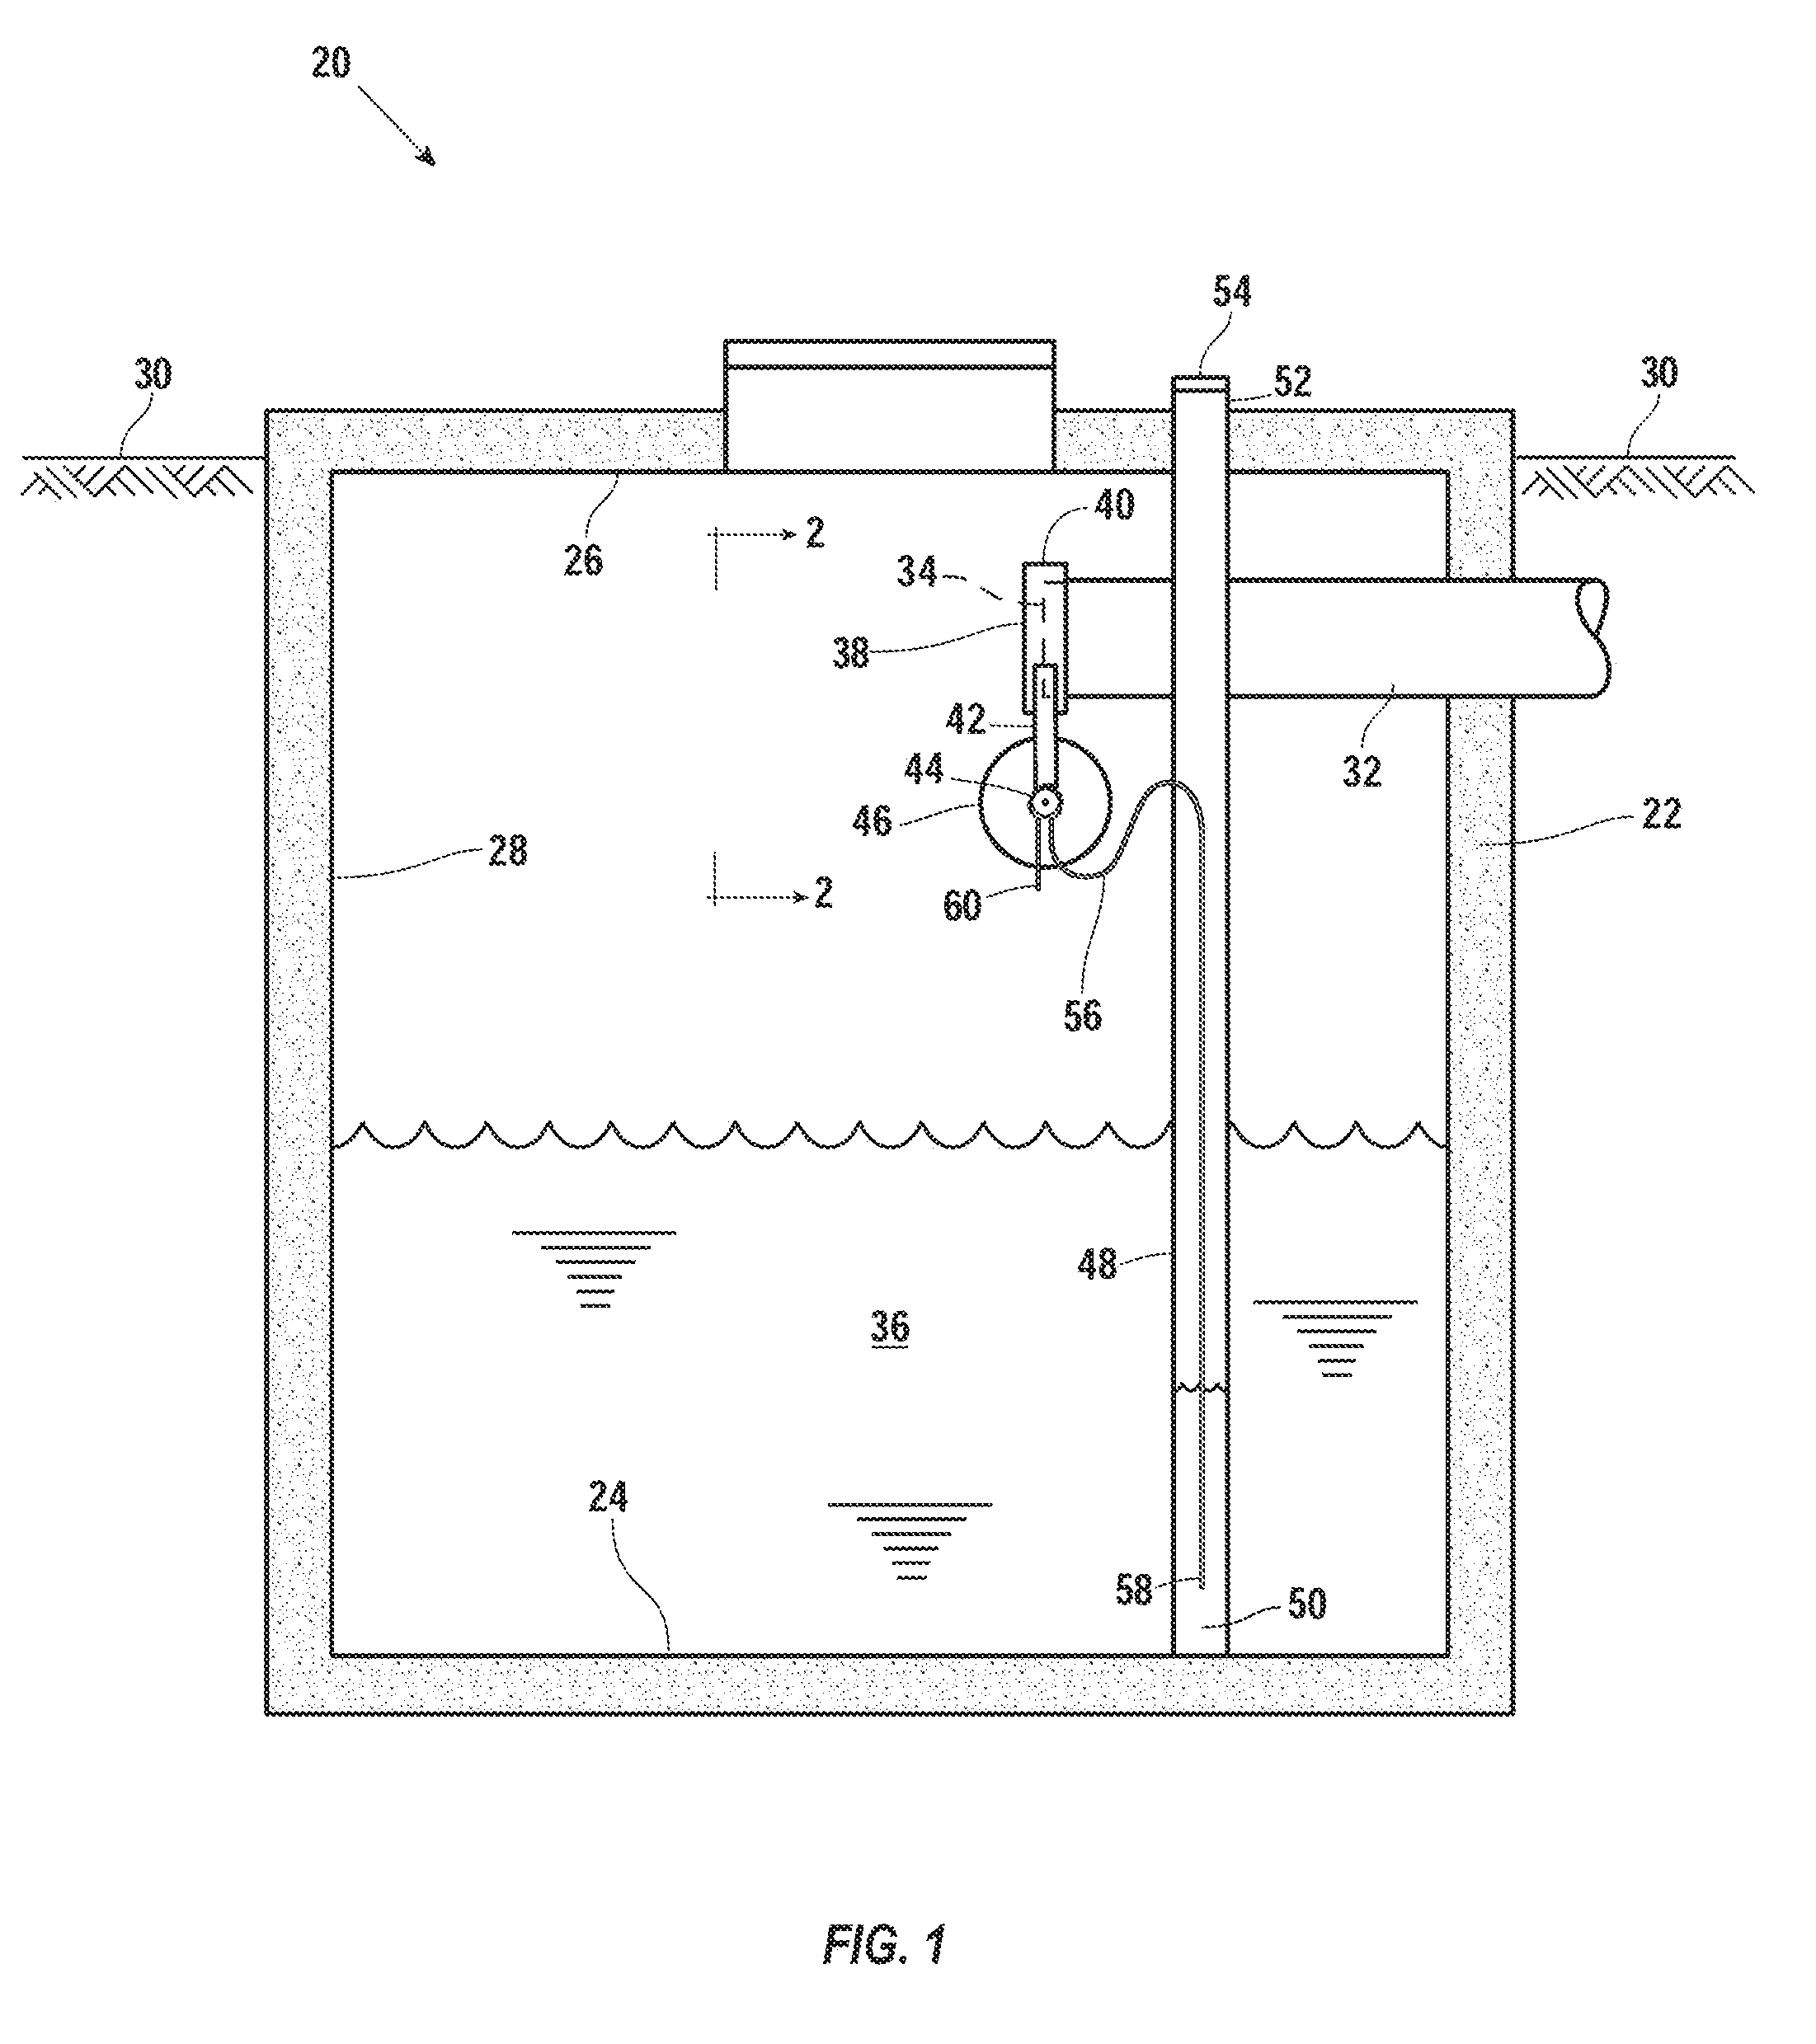 Chemical Delivery System for Water or Effluent Treatment